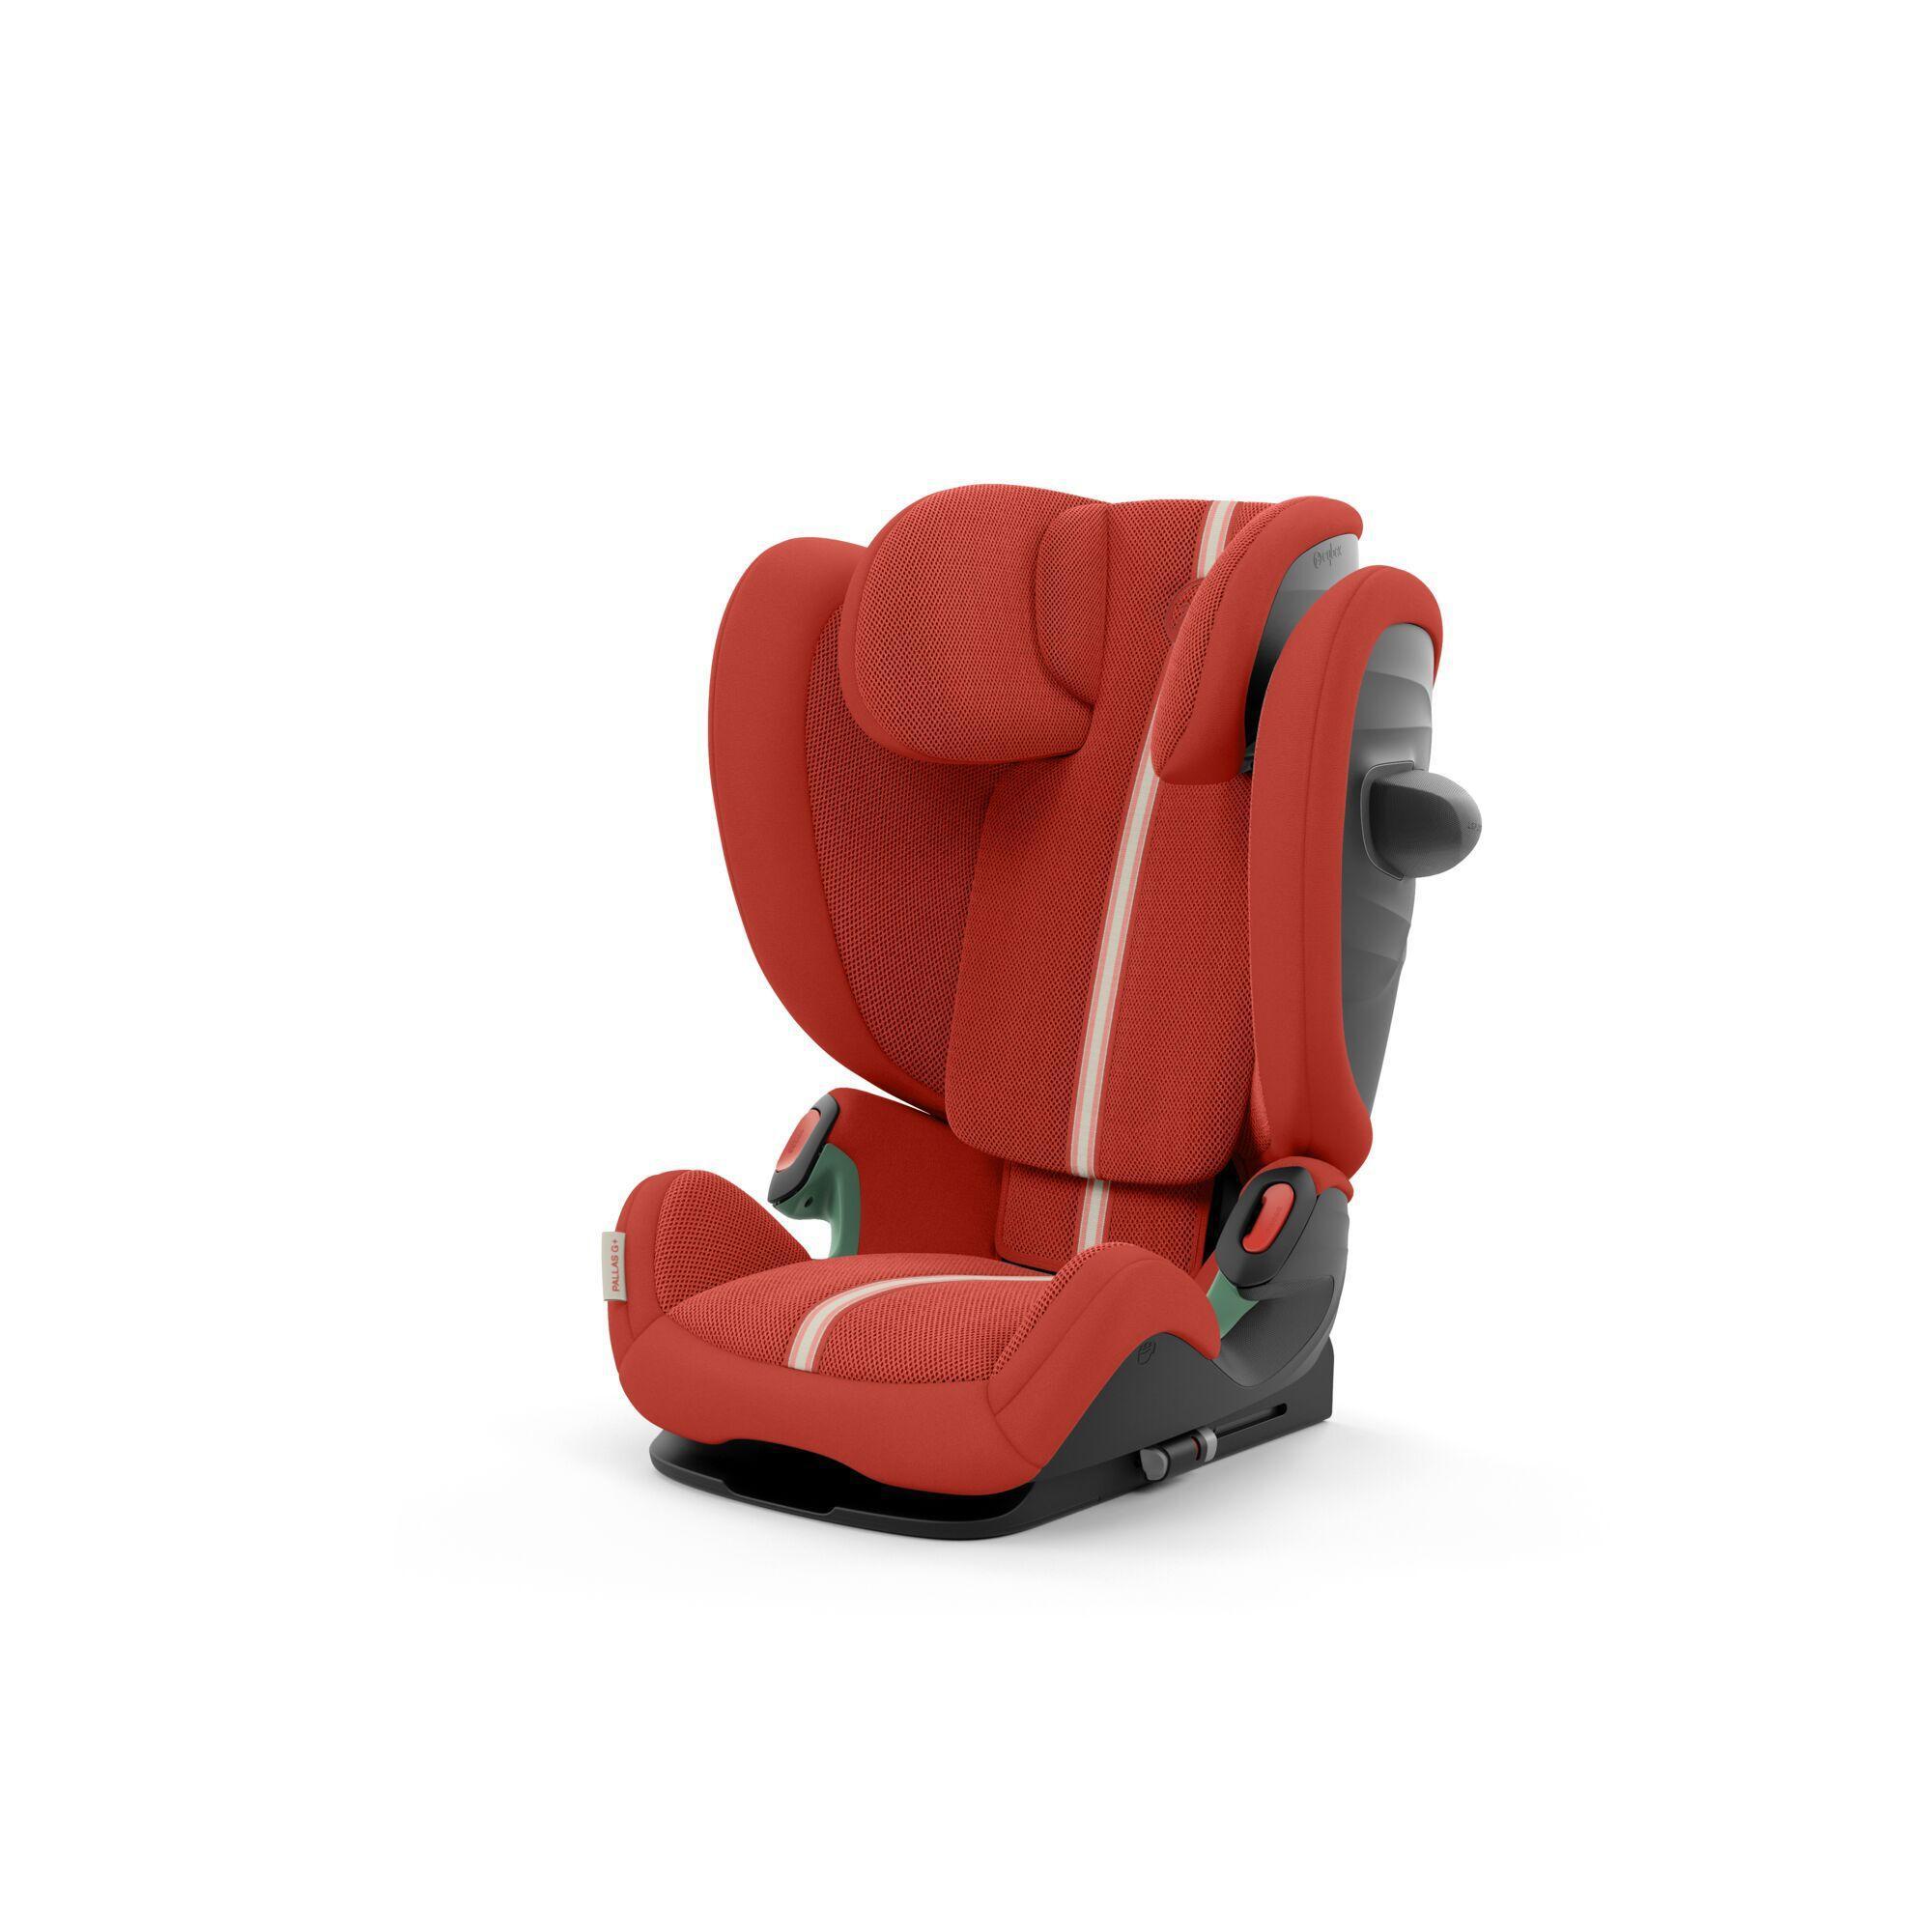 CYBEX PALLAS G I-SIZE (9 months up to 12yrs)